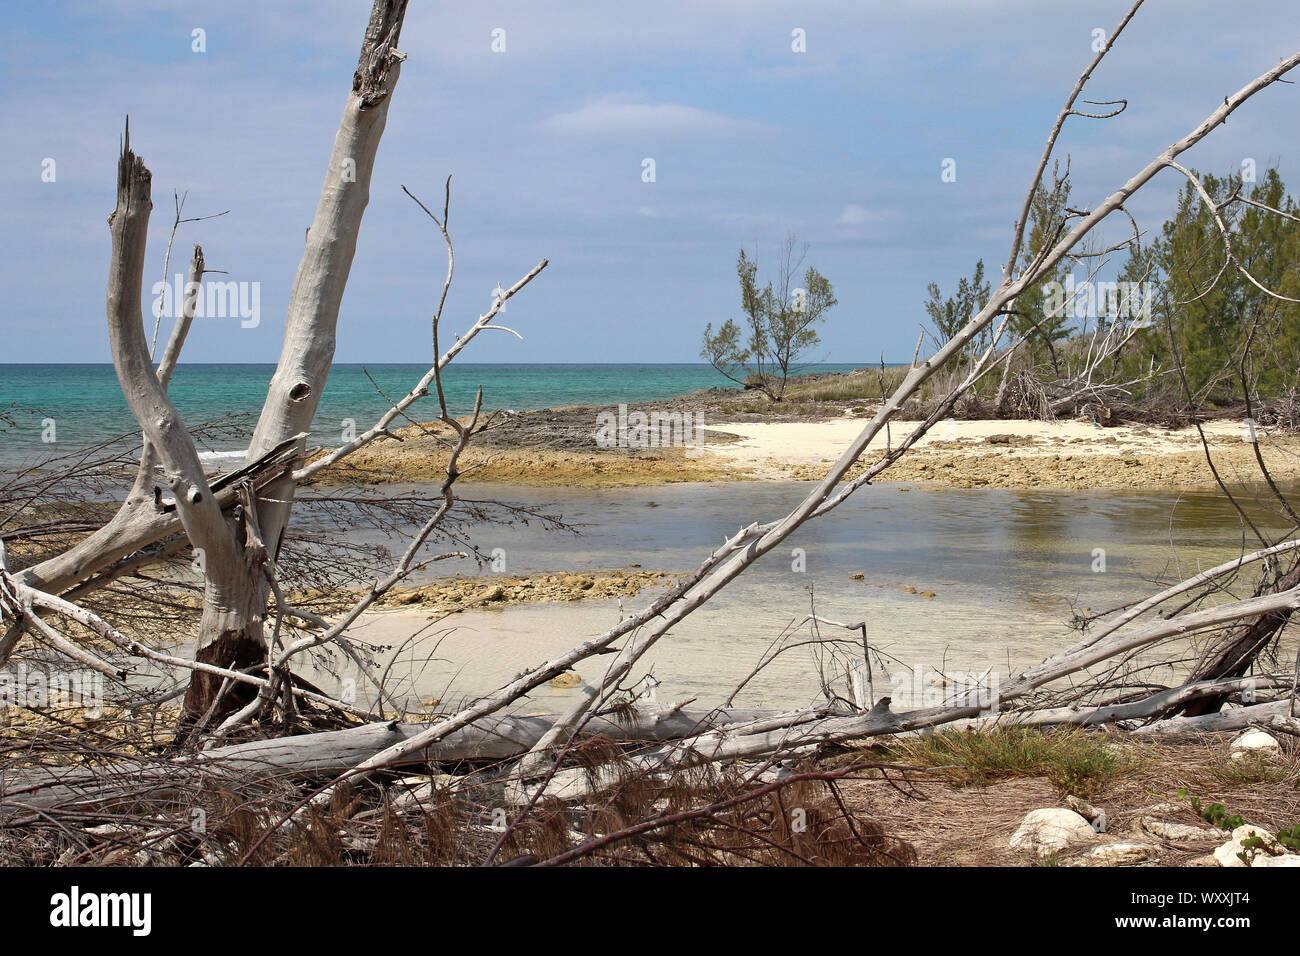 A shoreline scene of a small bay on the south coast of Grand Bahama island still showing signs of damage from previous hurricanes before Dorian. Stock Photo